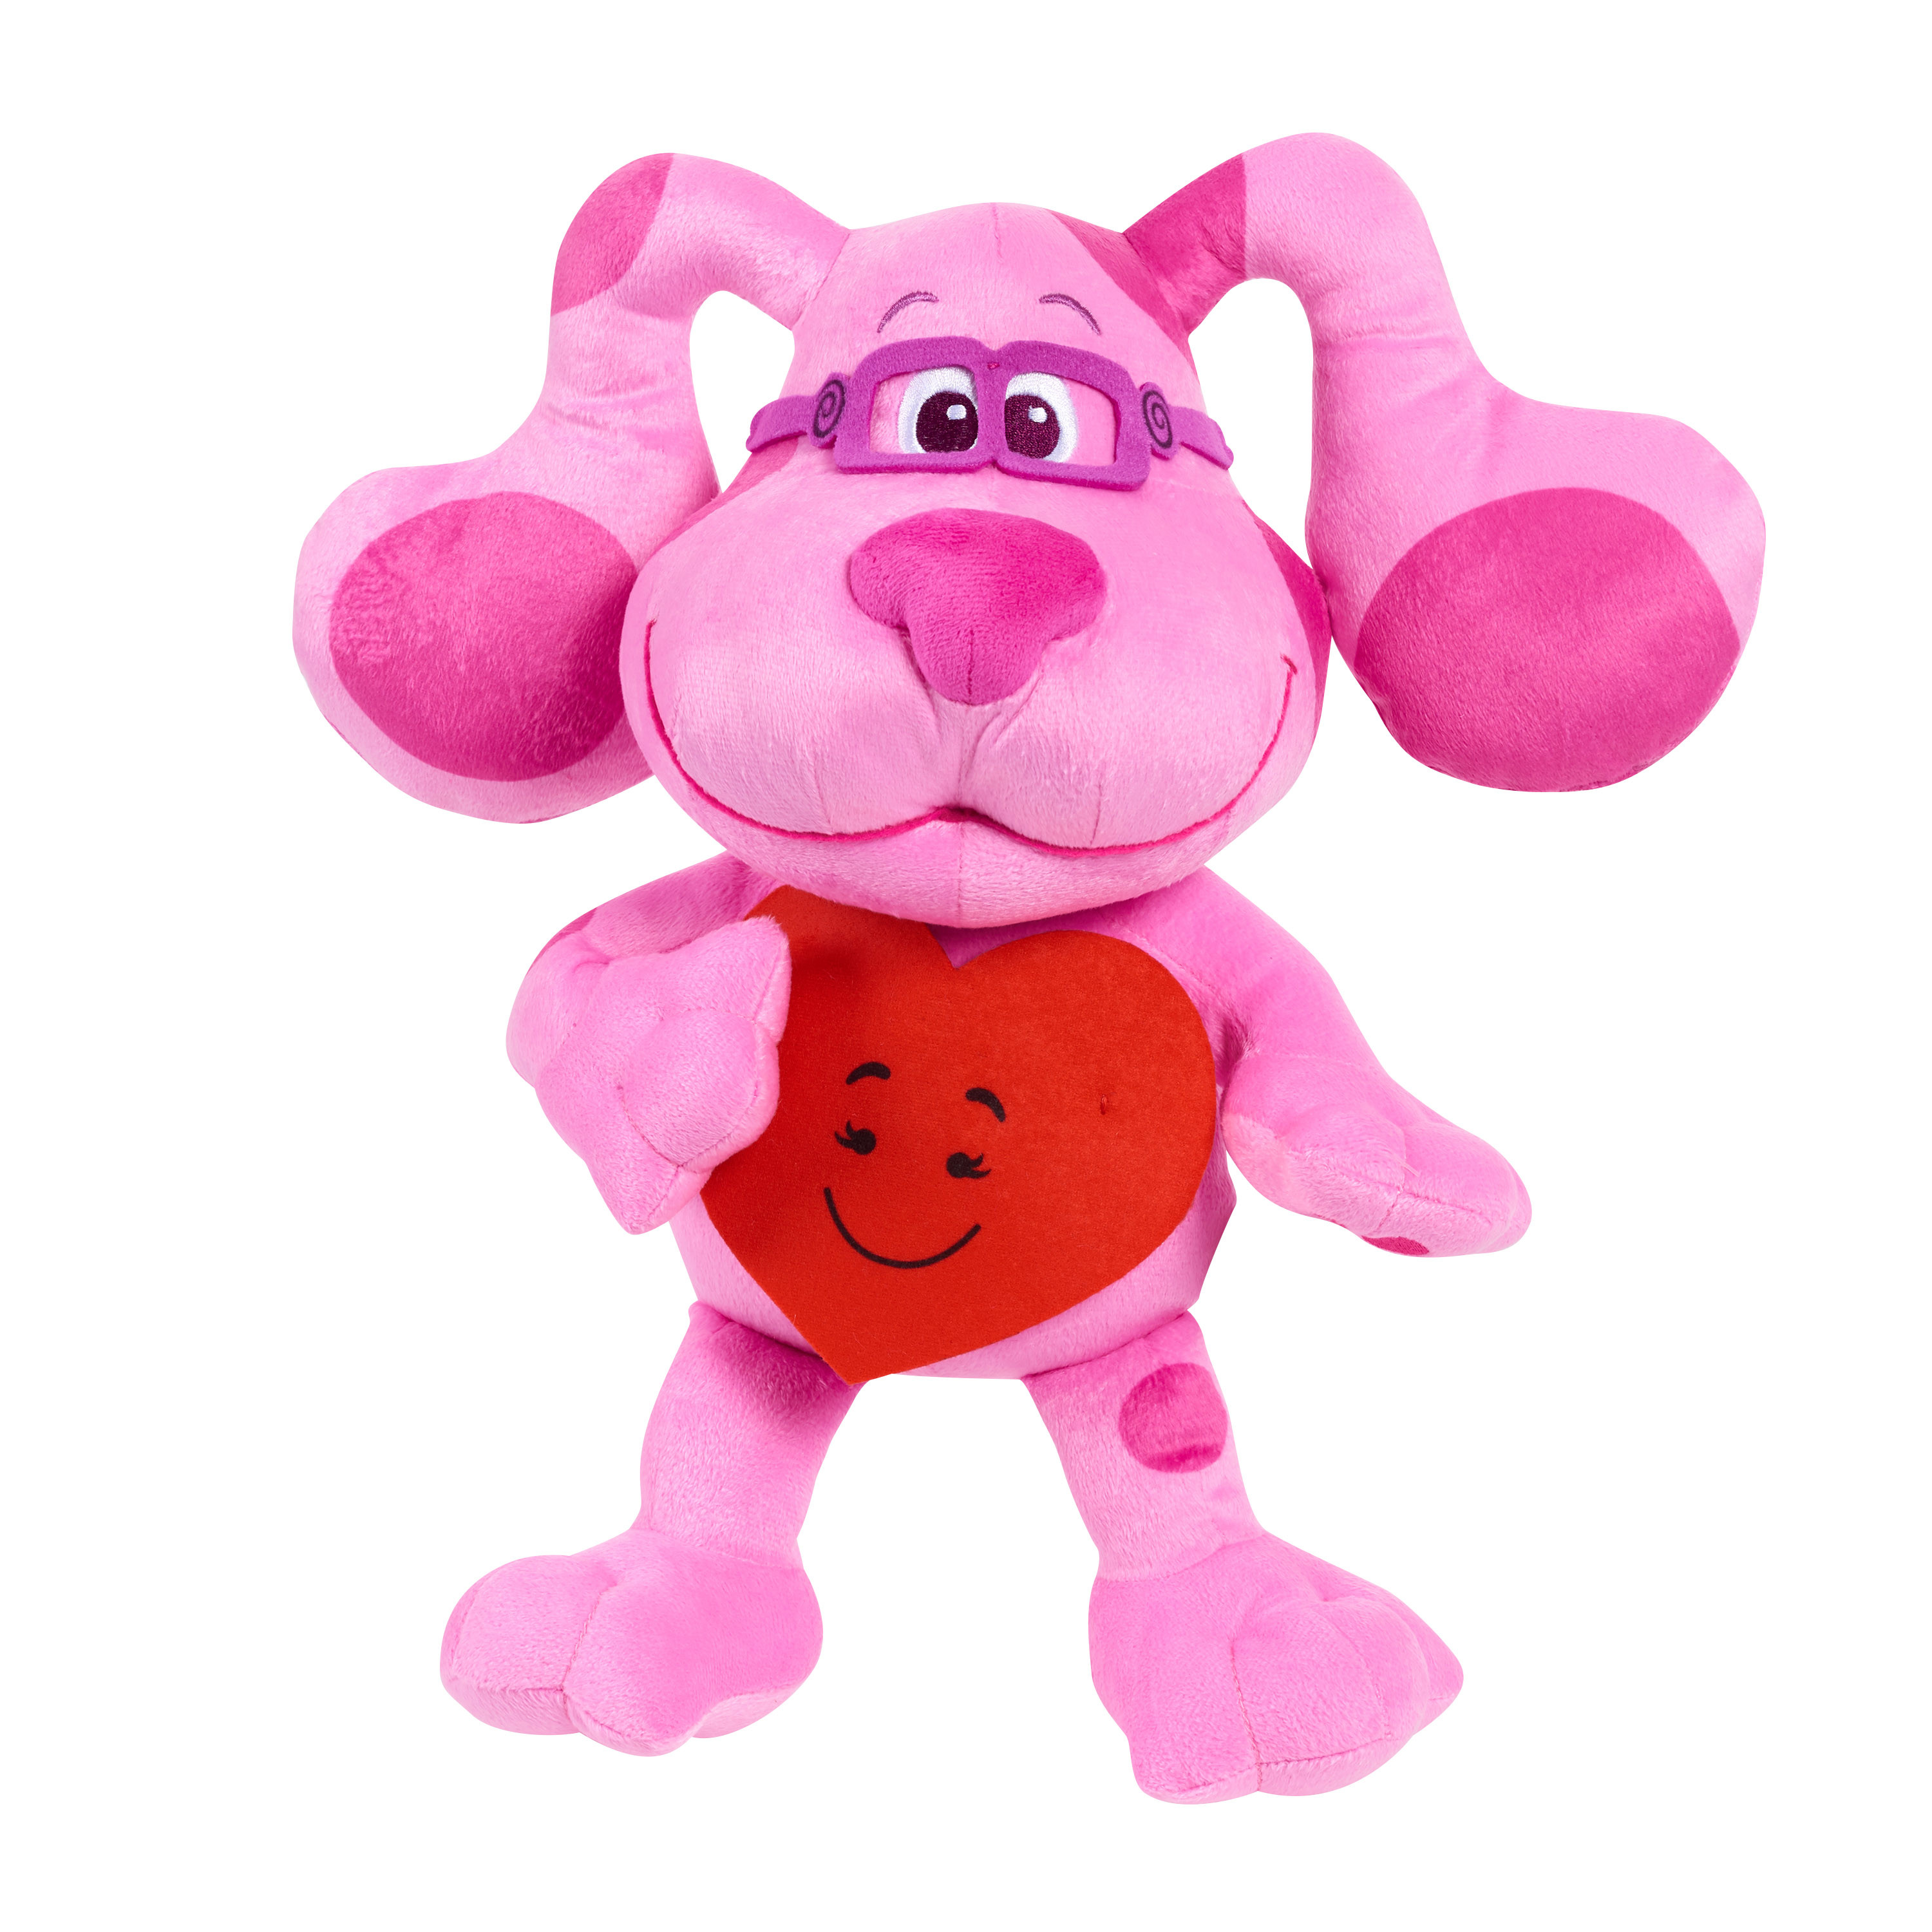 Blue’s Clues & You! Valentines Magenta, 12-inch Large Plush,  Kids Toys for Ages 3 Up, Gifts and Presents - image 1 of 3